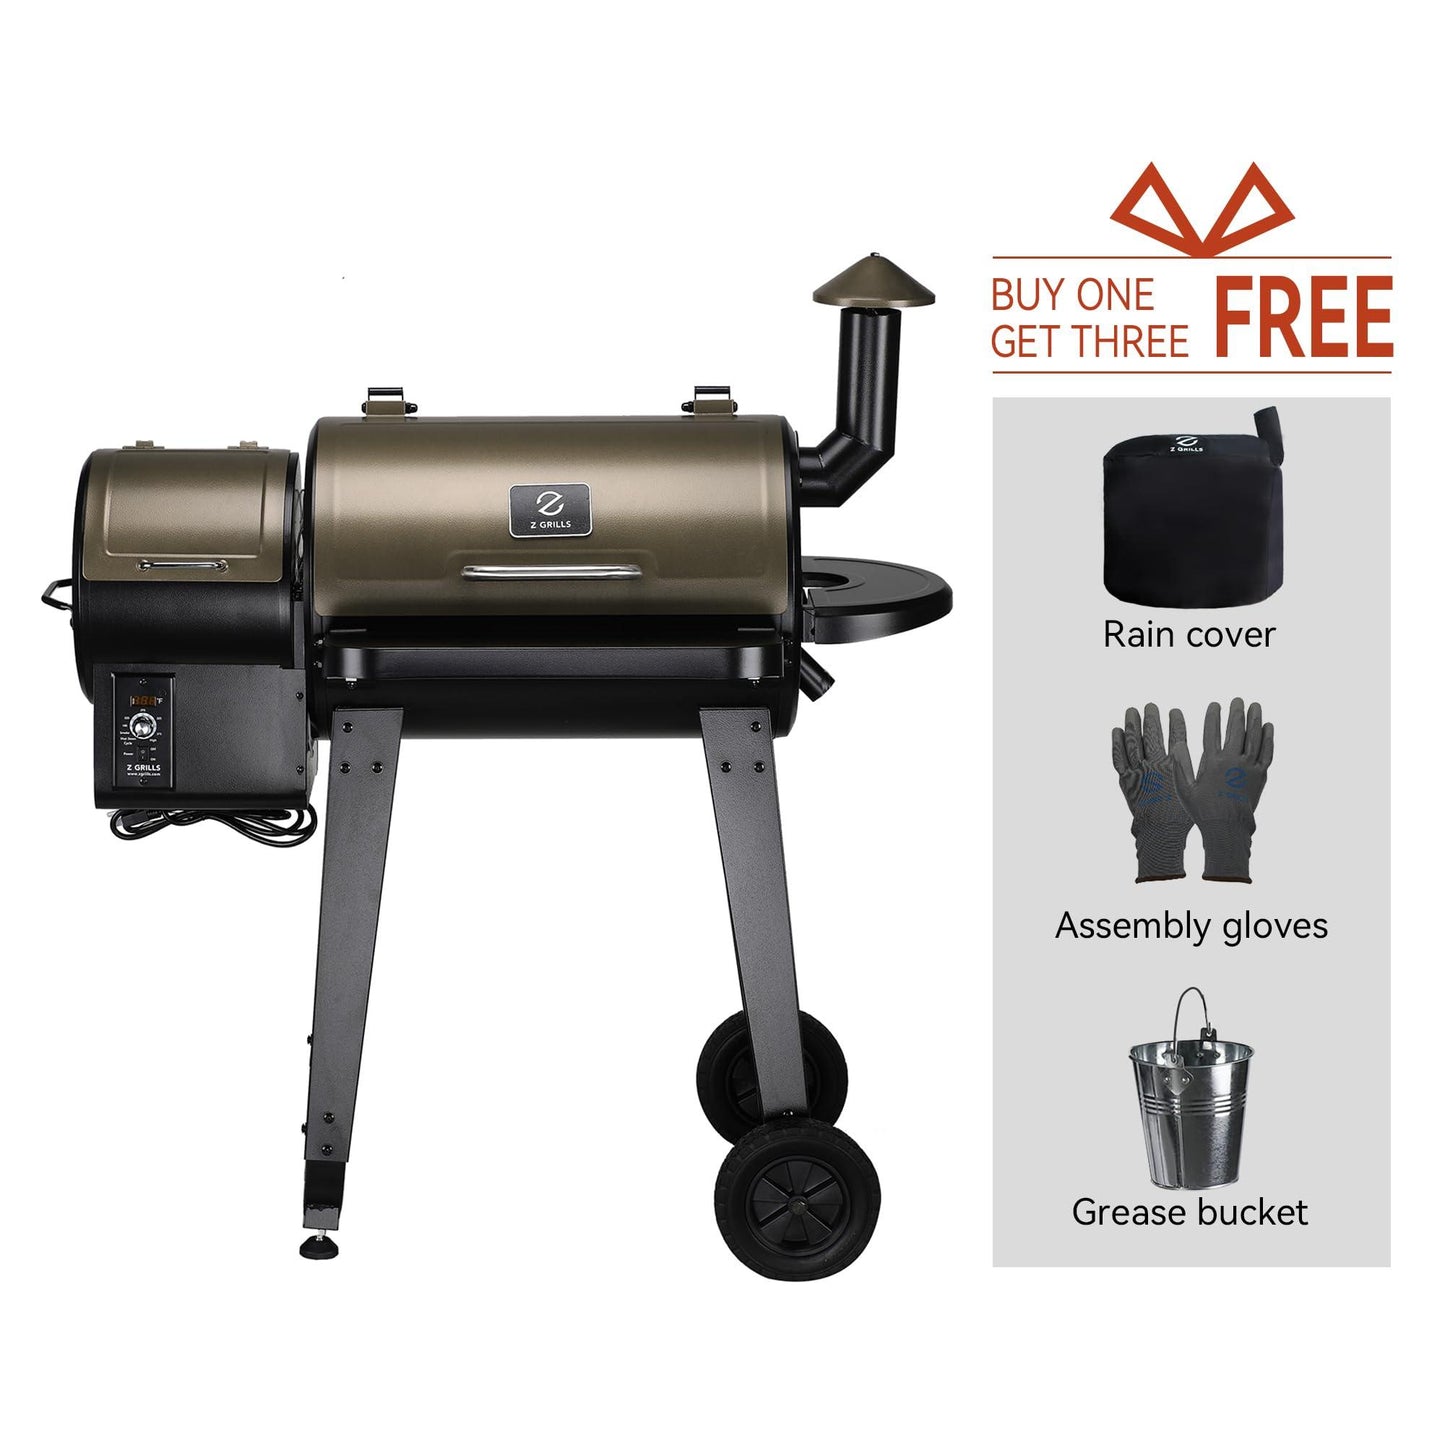 Z GRILLS Wood Pellet Grill Smoker, 8 in 1 Portable BBQ Grill with Automatic Temperature Control, Foldable Front Shelf, Rain Cover, 459 sq in Cooking Area for Patio, Backyard, Outdoor Barbecue, Bronze - CookCave